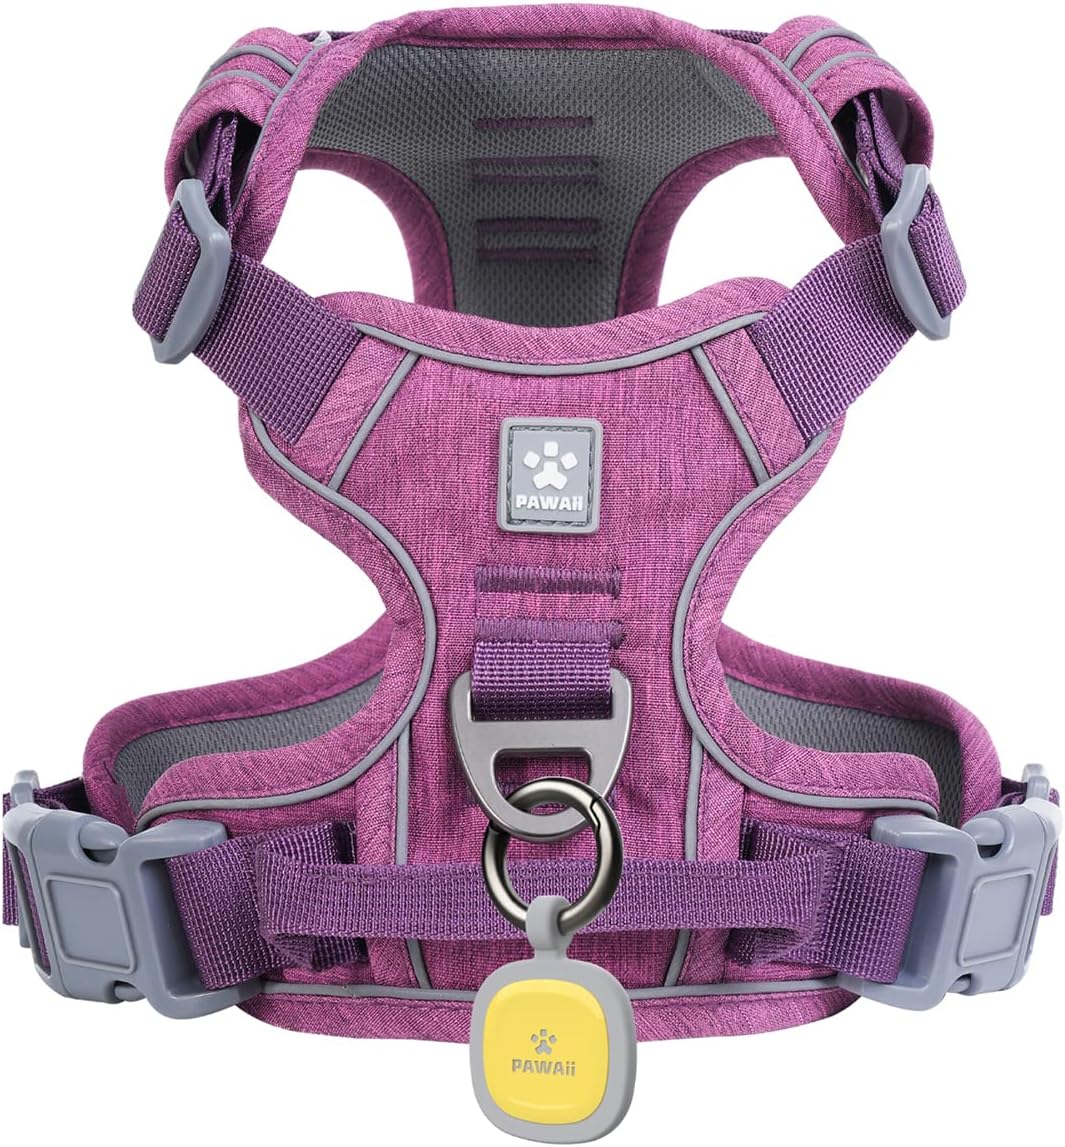 Pawaii Dog Harness for Medium Dogs, Dog Harness with Pet ID Tag, No Choke Dog Harness, Adjustable Soft Padded Pet Vest with Easy Control Handle